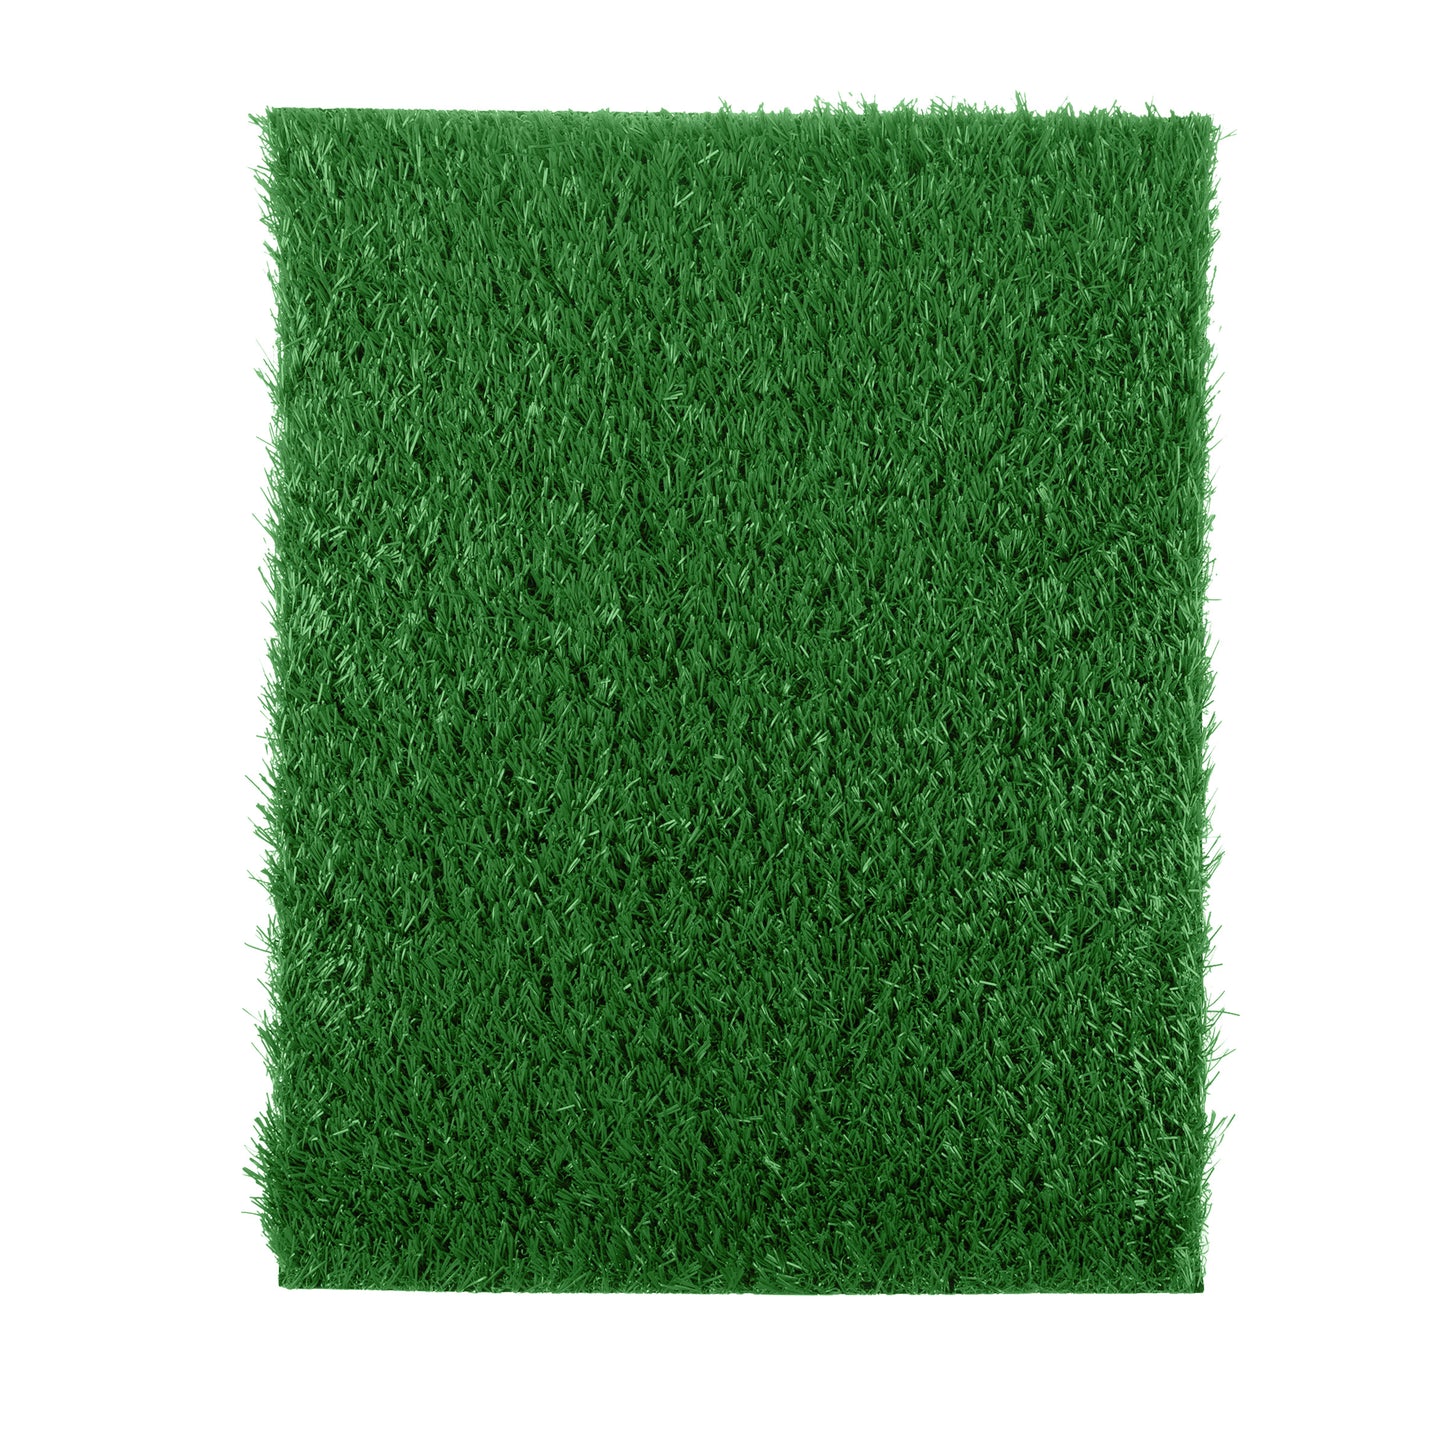 Set of 3 Replacement Turf Grass Pee Pads